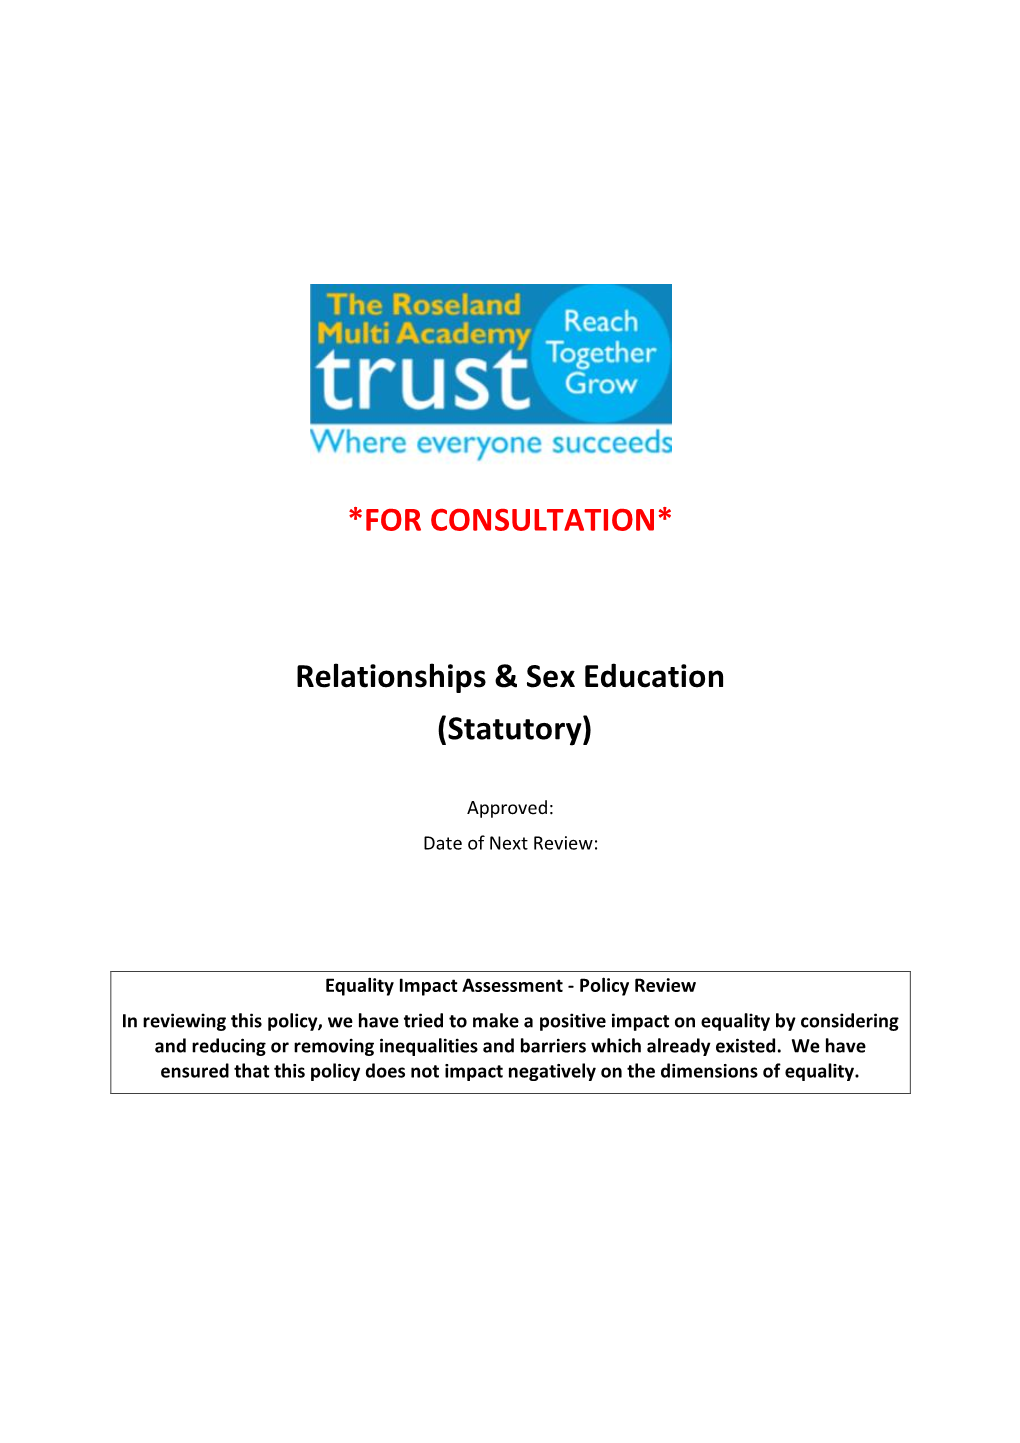 FOR CONSULTATION* Relationships & Sex Education